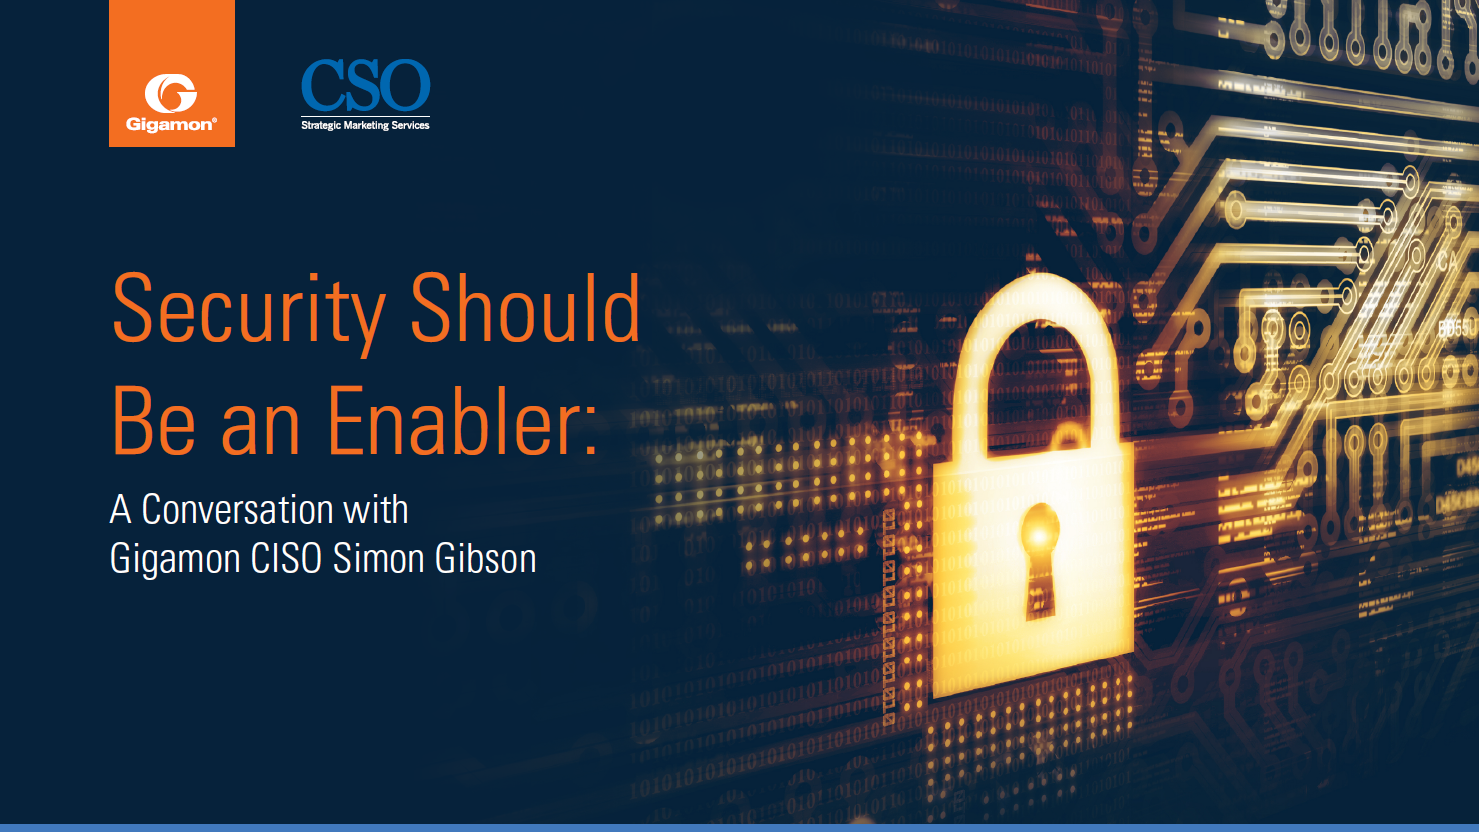 ar idg cso security should be an enabler interview with gigamon ciso cover - Rethink Network Security Deployment